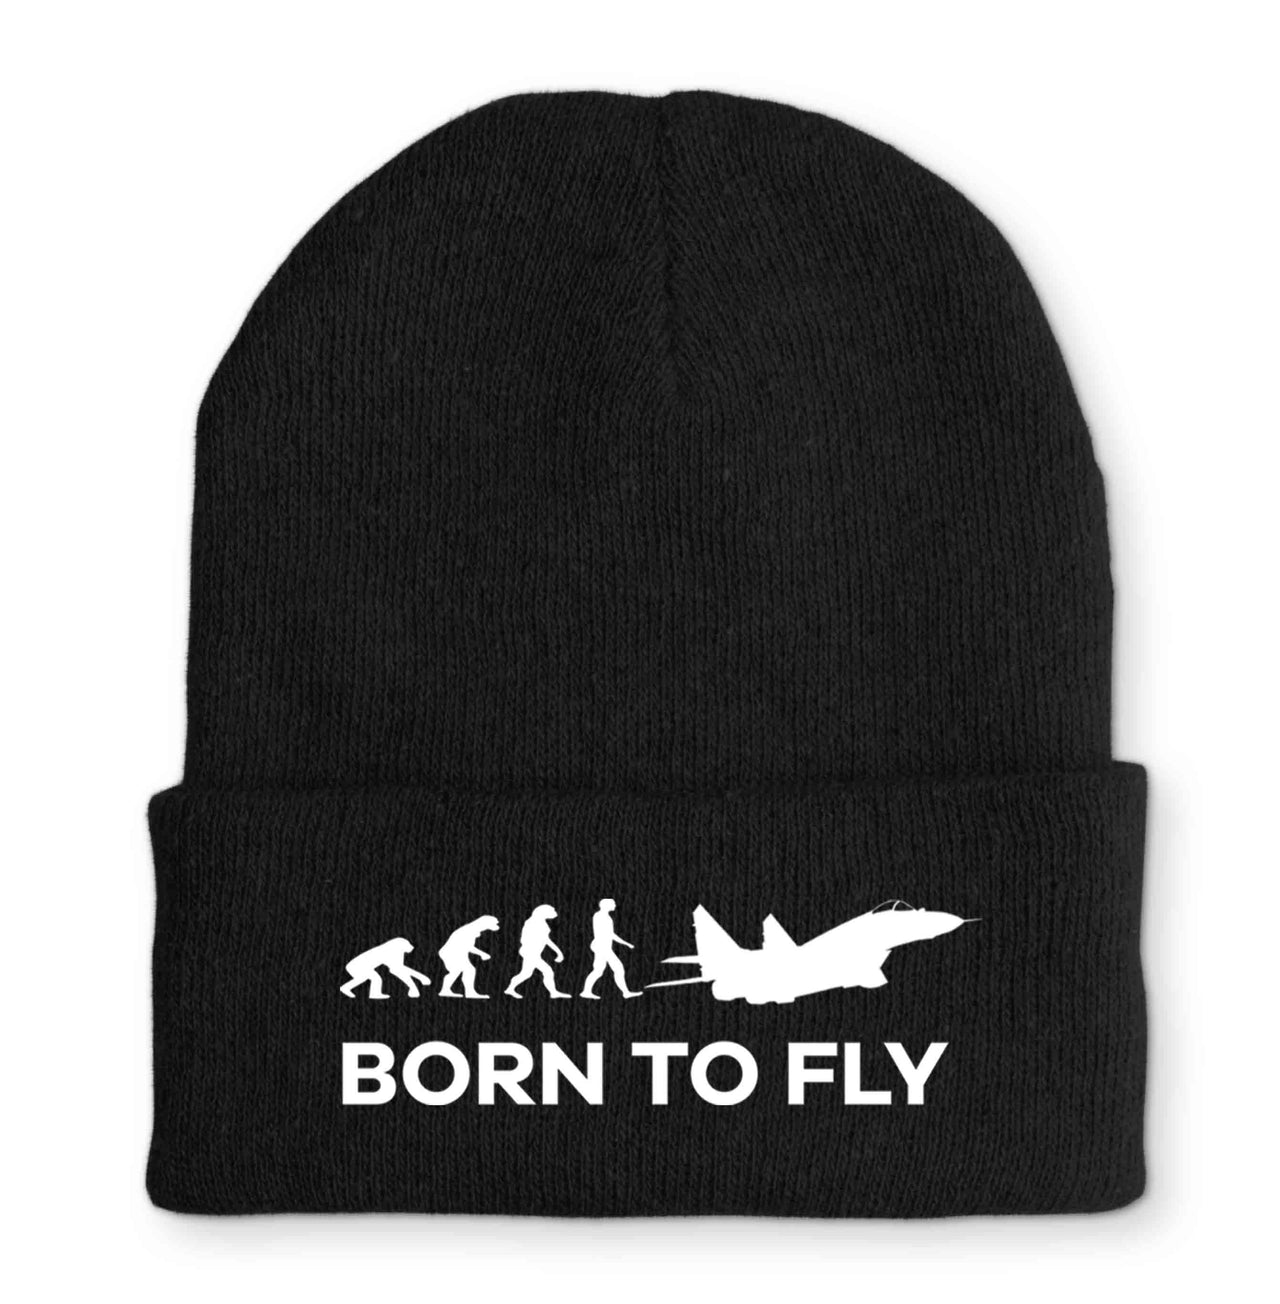 Born To Fly Military Embroidered Beanies